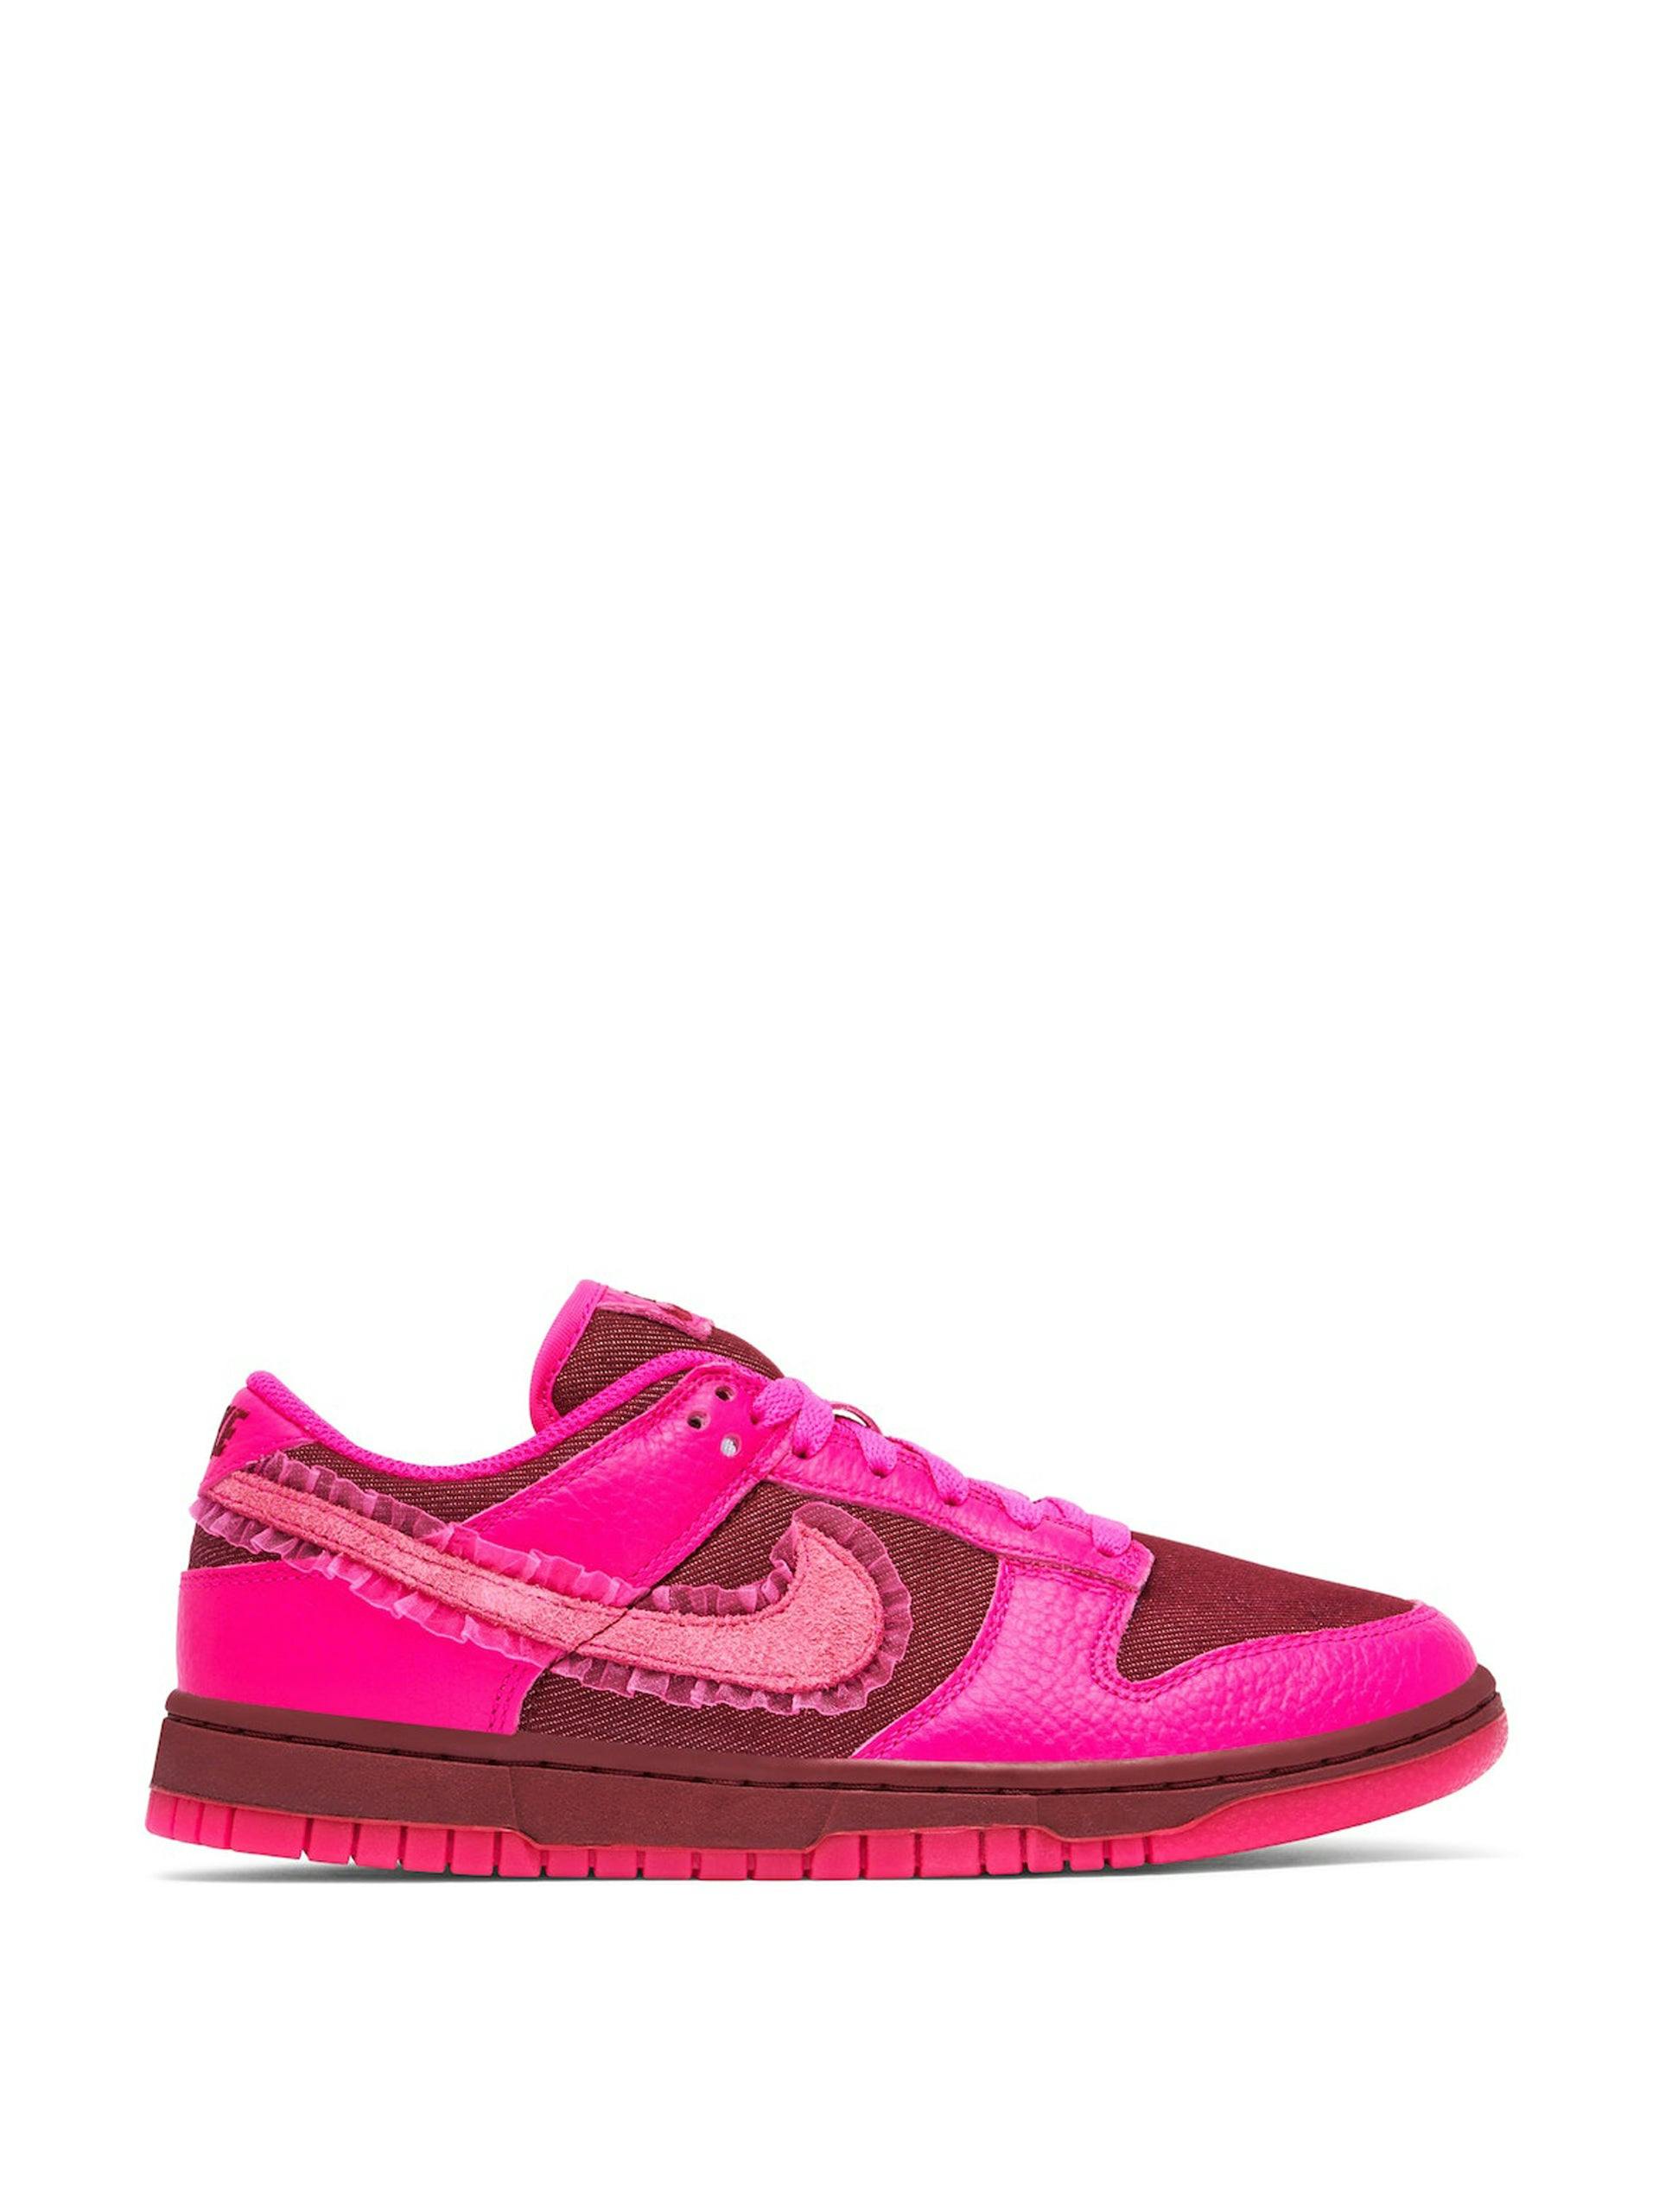 Pink Dunk trainers